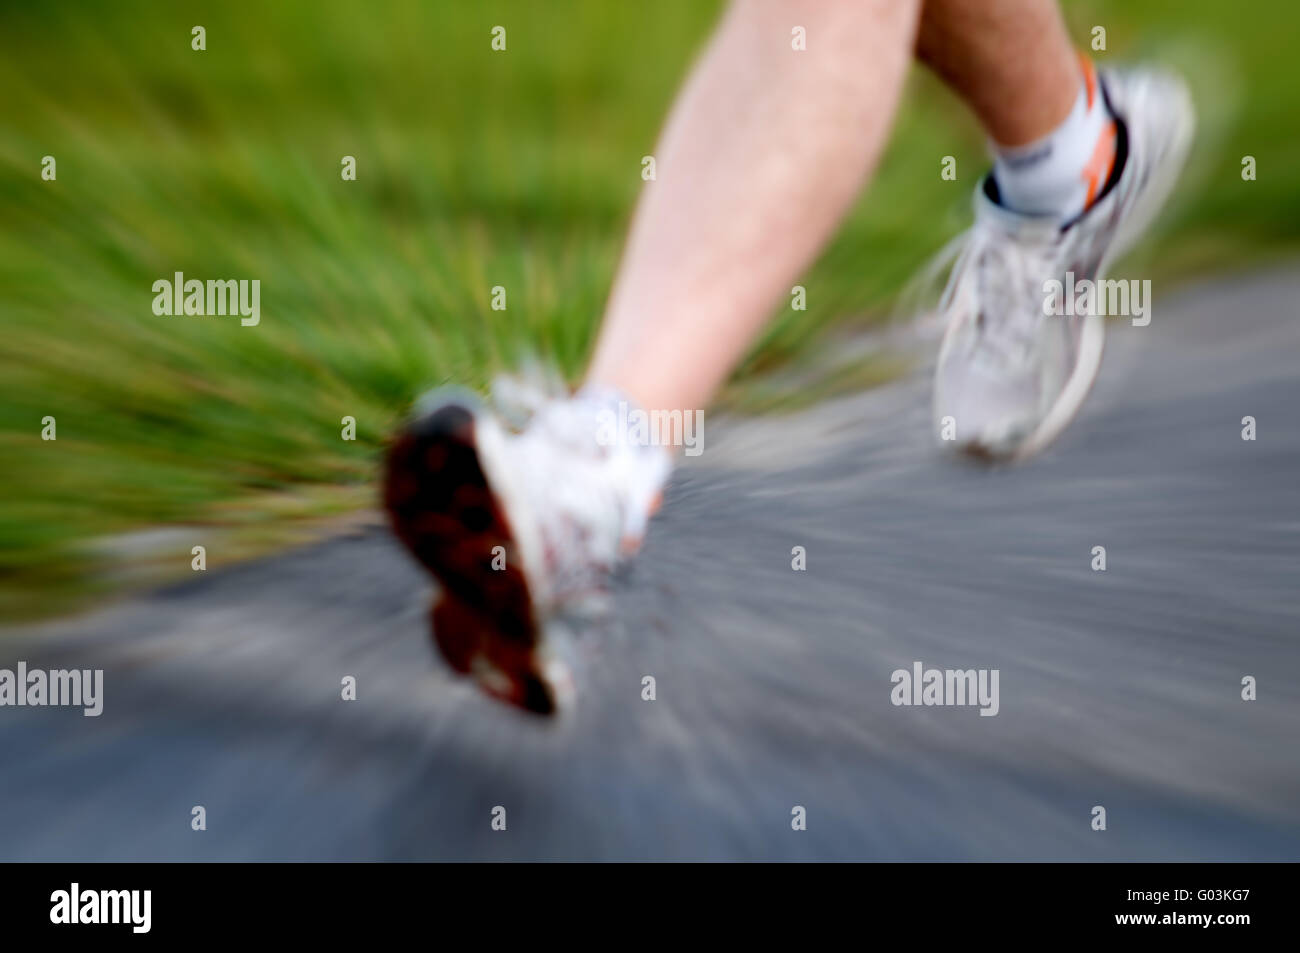 Man running active lifestyle concept. Motion blurred Stock Photo